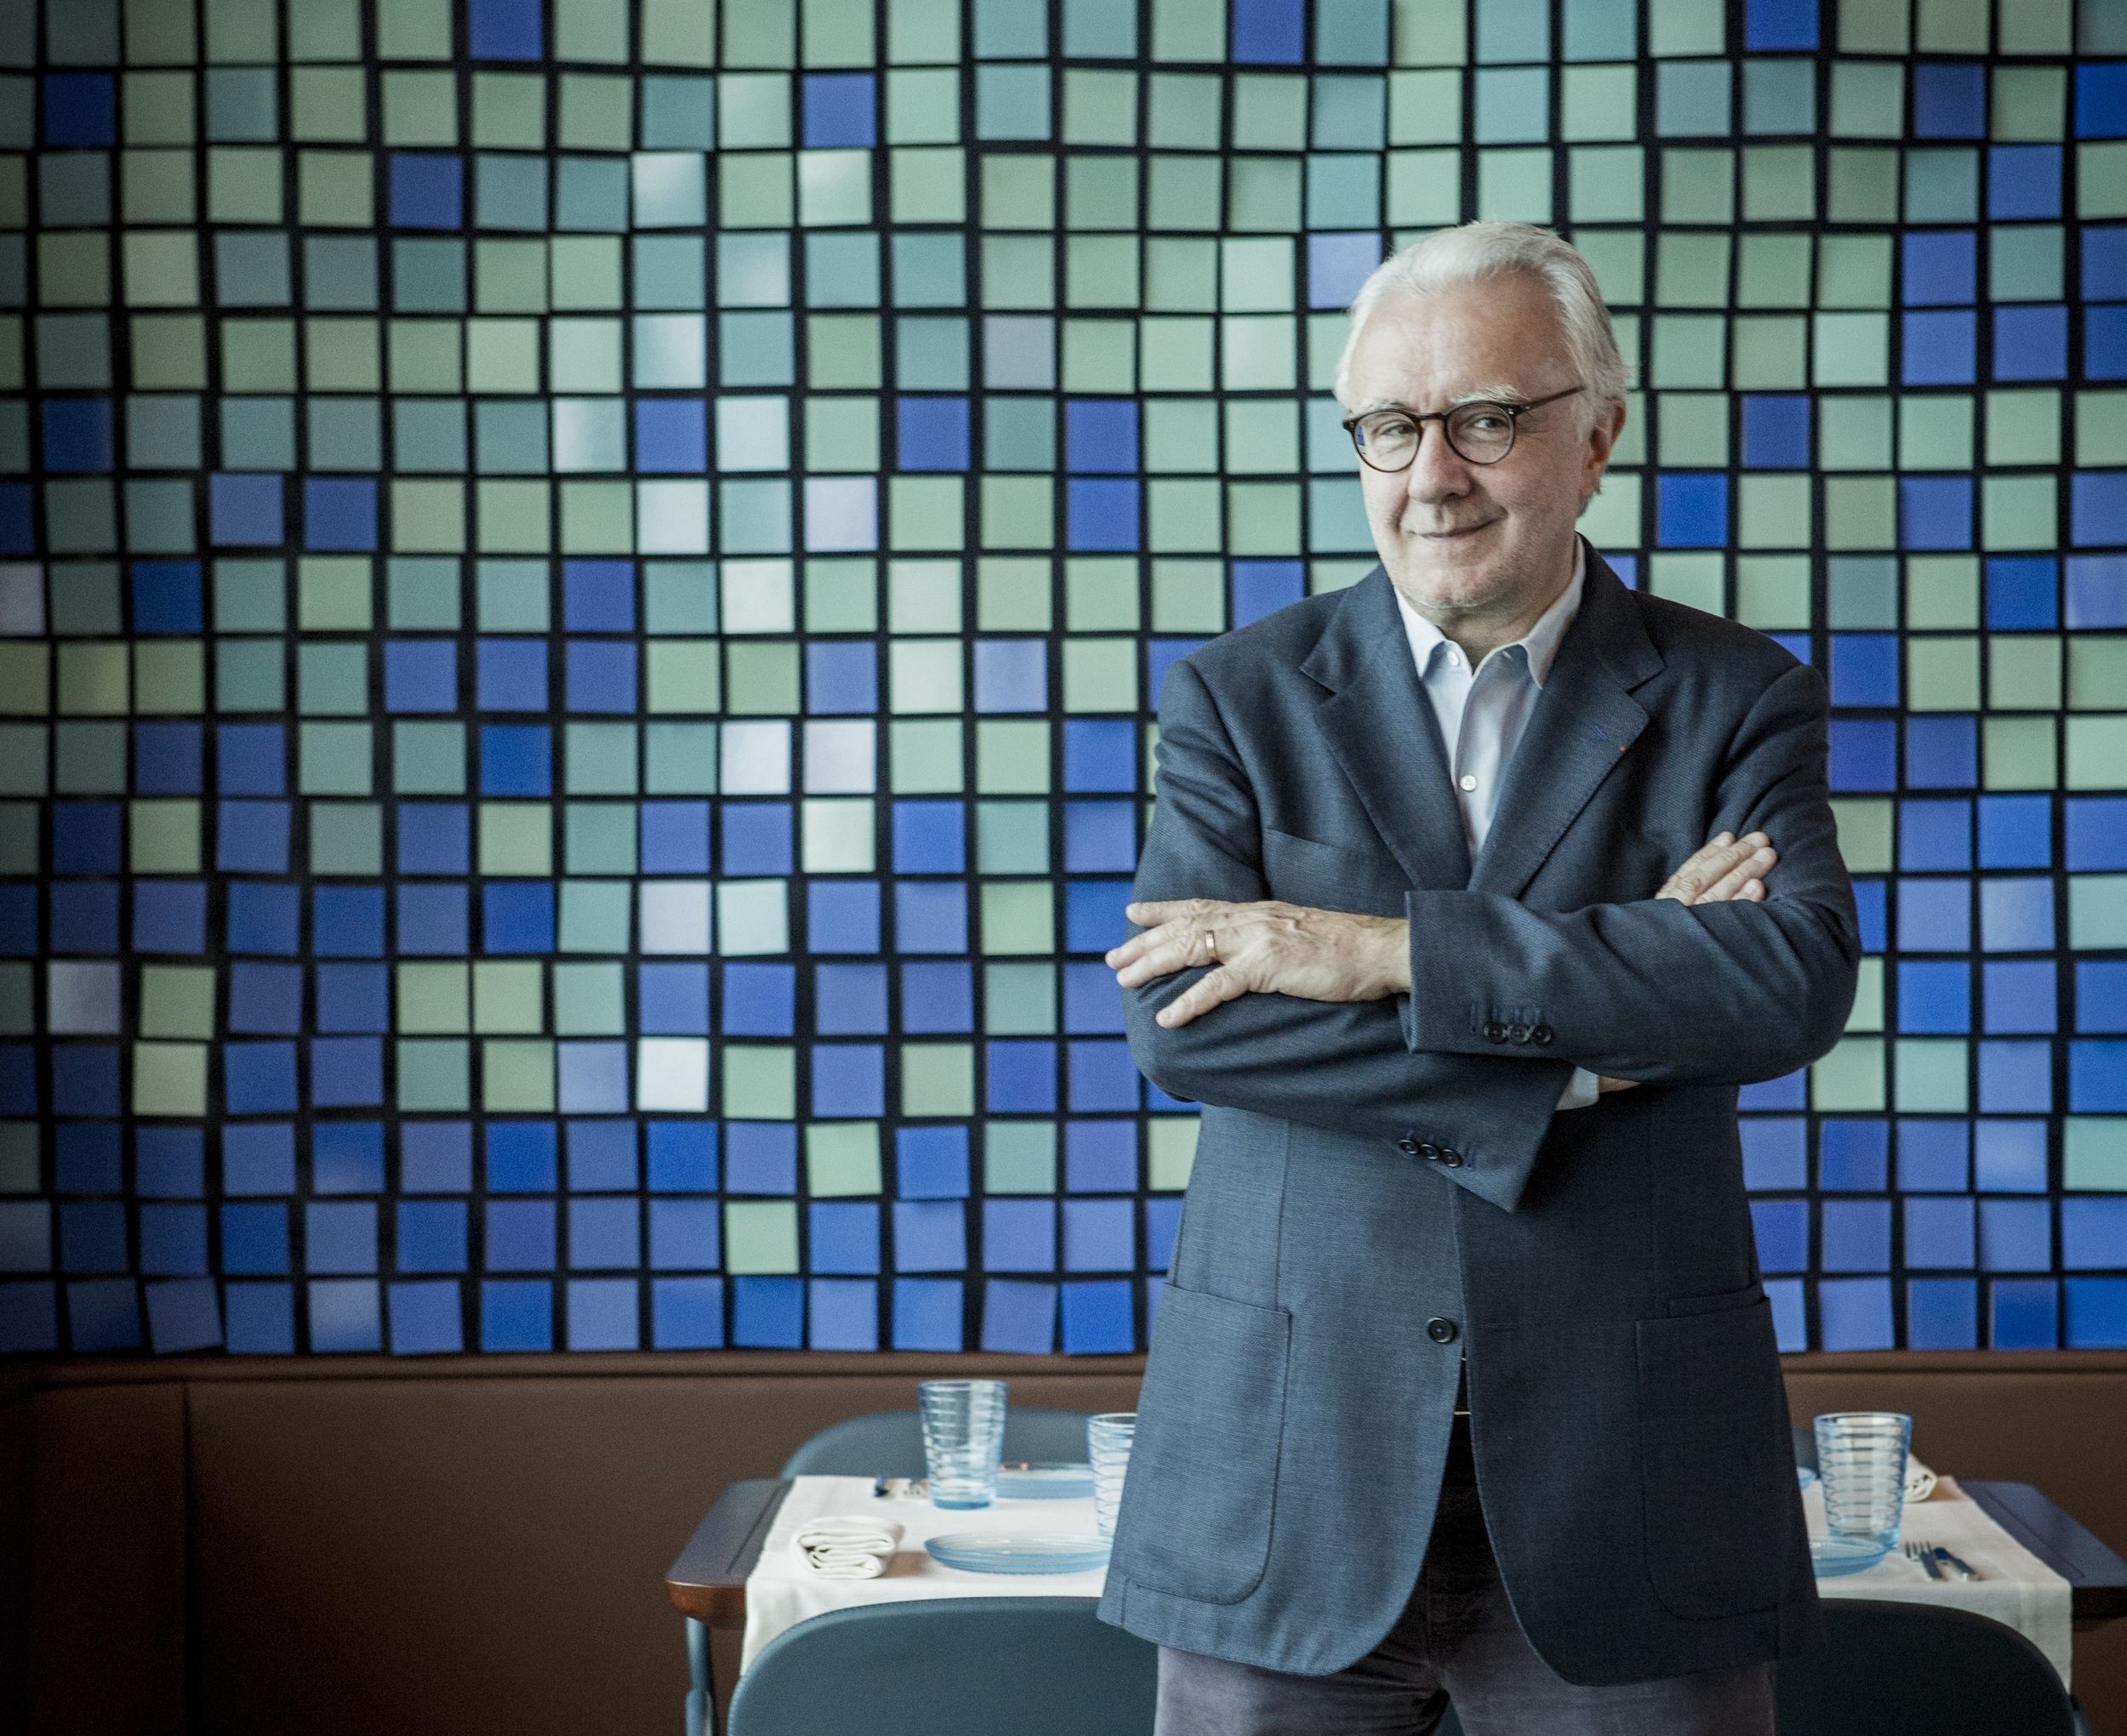 Q&A: Alain Ducasse, the “godfather” of French cuisine